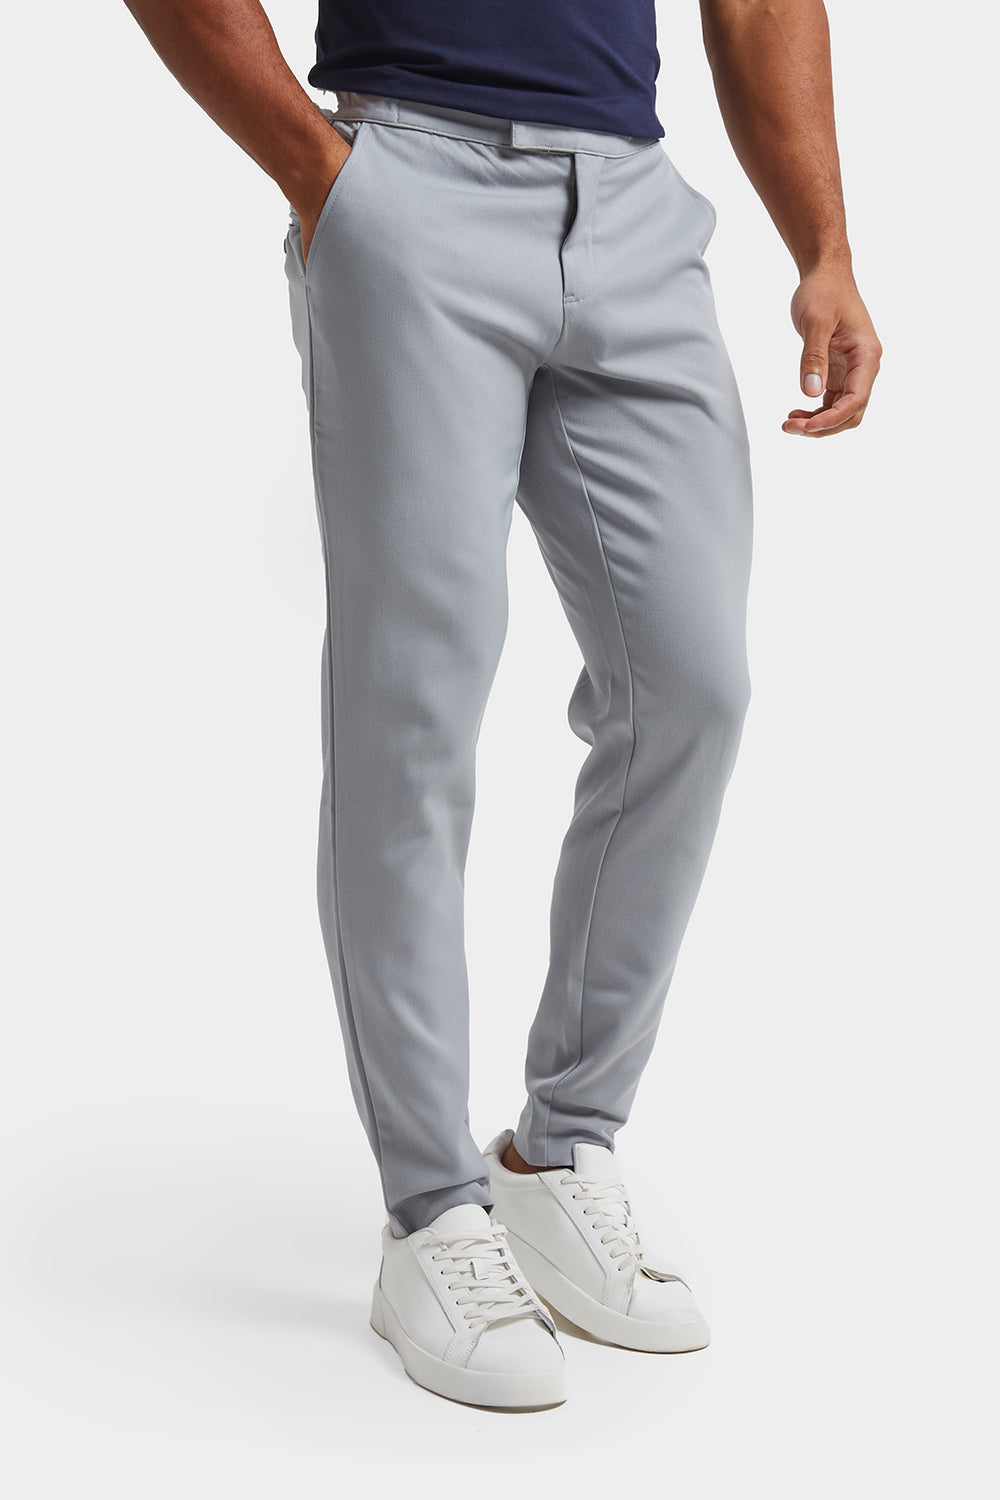 365 Trousers 2-Pack - TAILORED ATHLETE - ROW